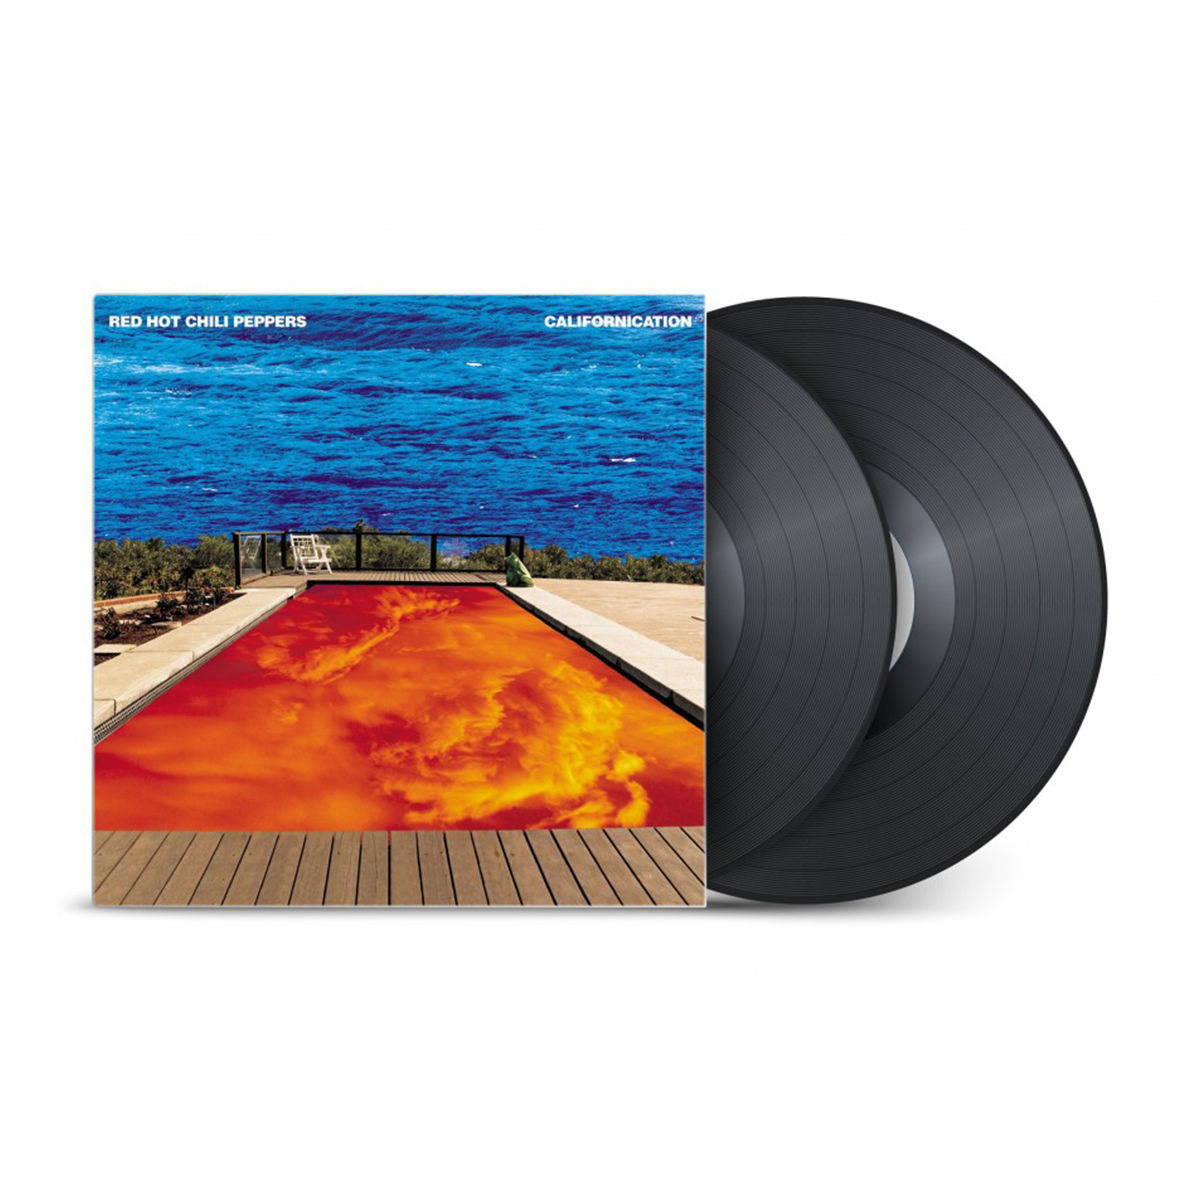 Red Hot Chili Peppers - Californication: Vinyl 2LP